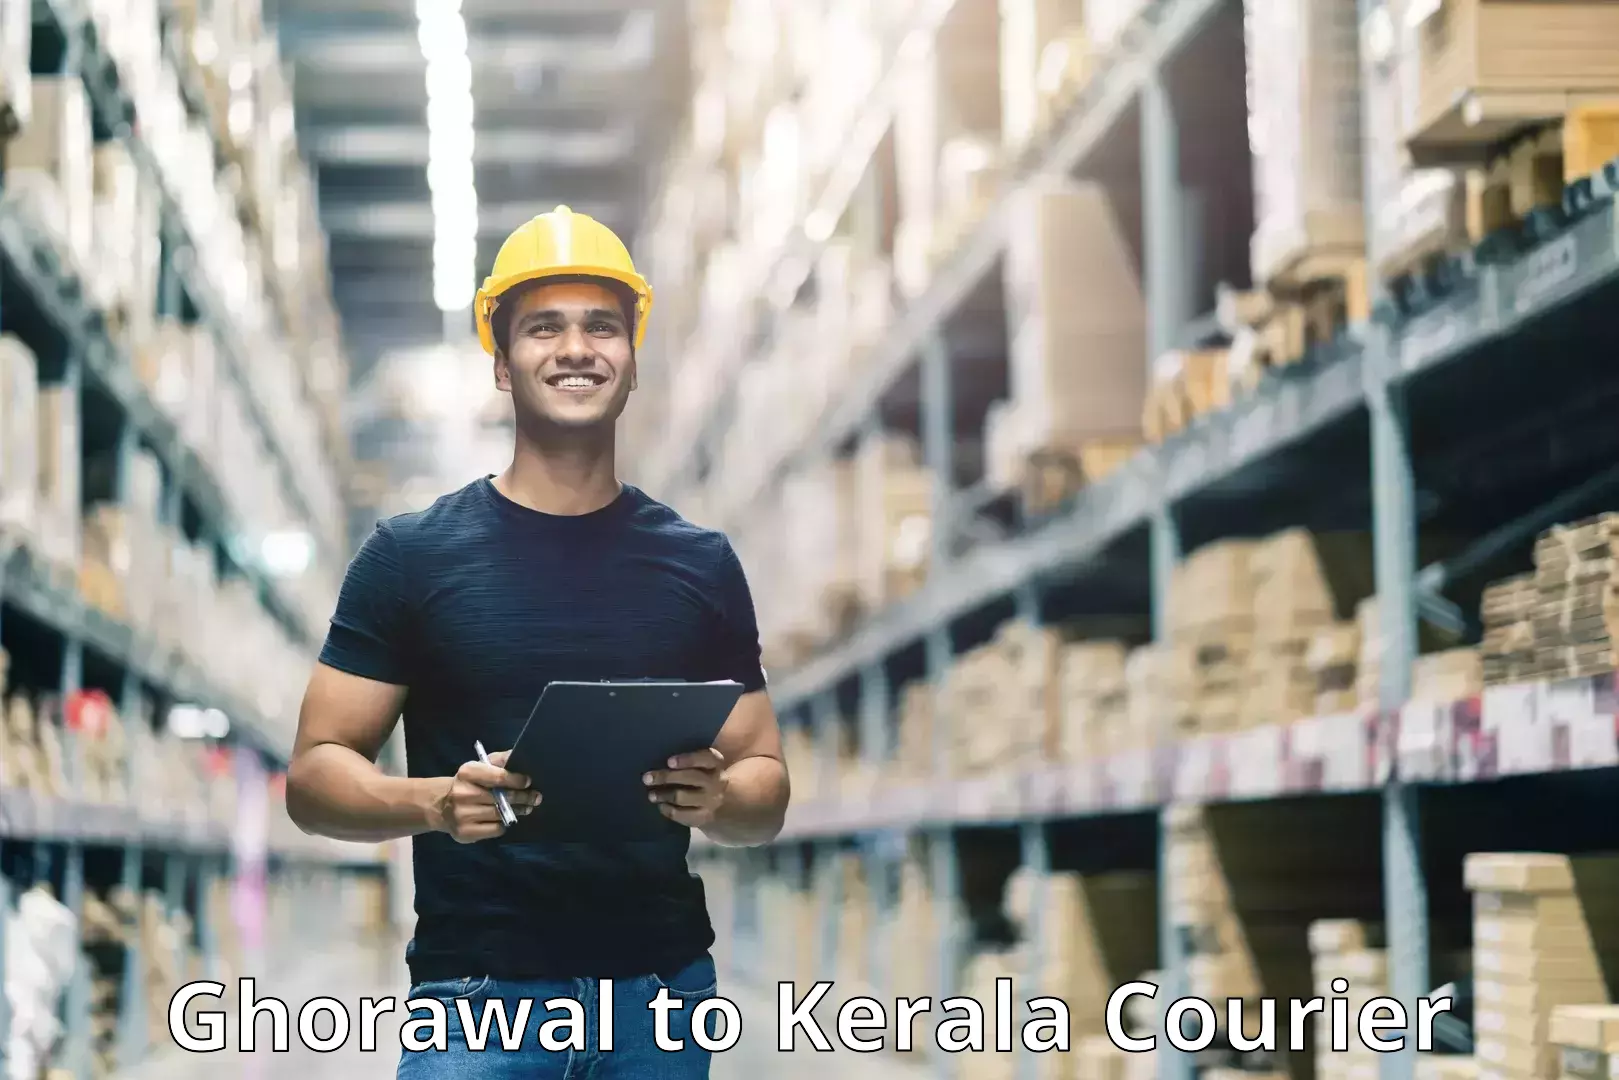 Sustainable delivery practices in Ghorawal to Kochi